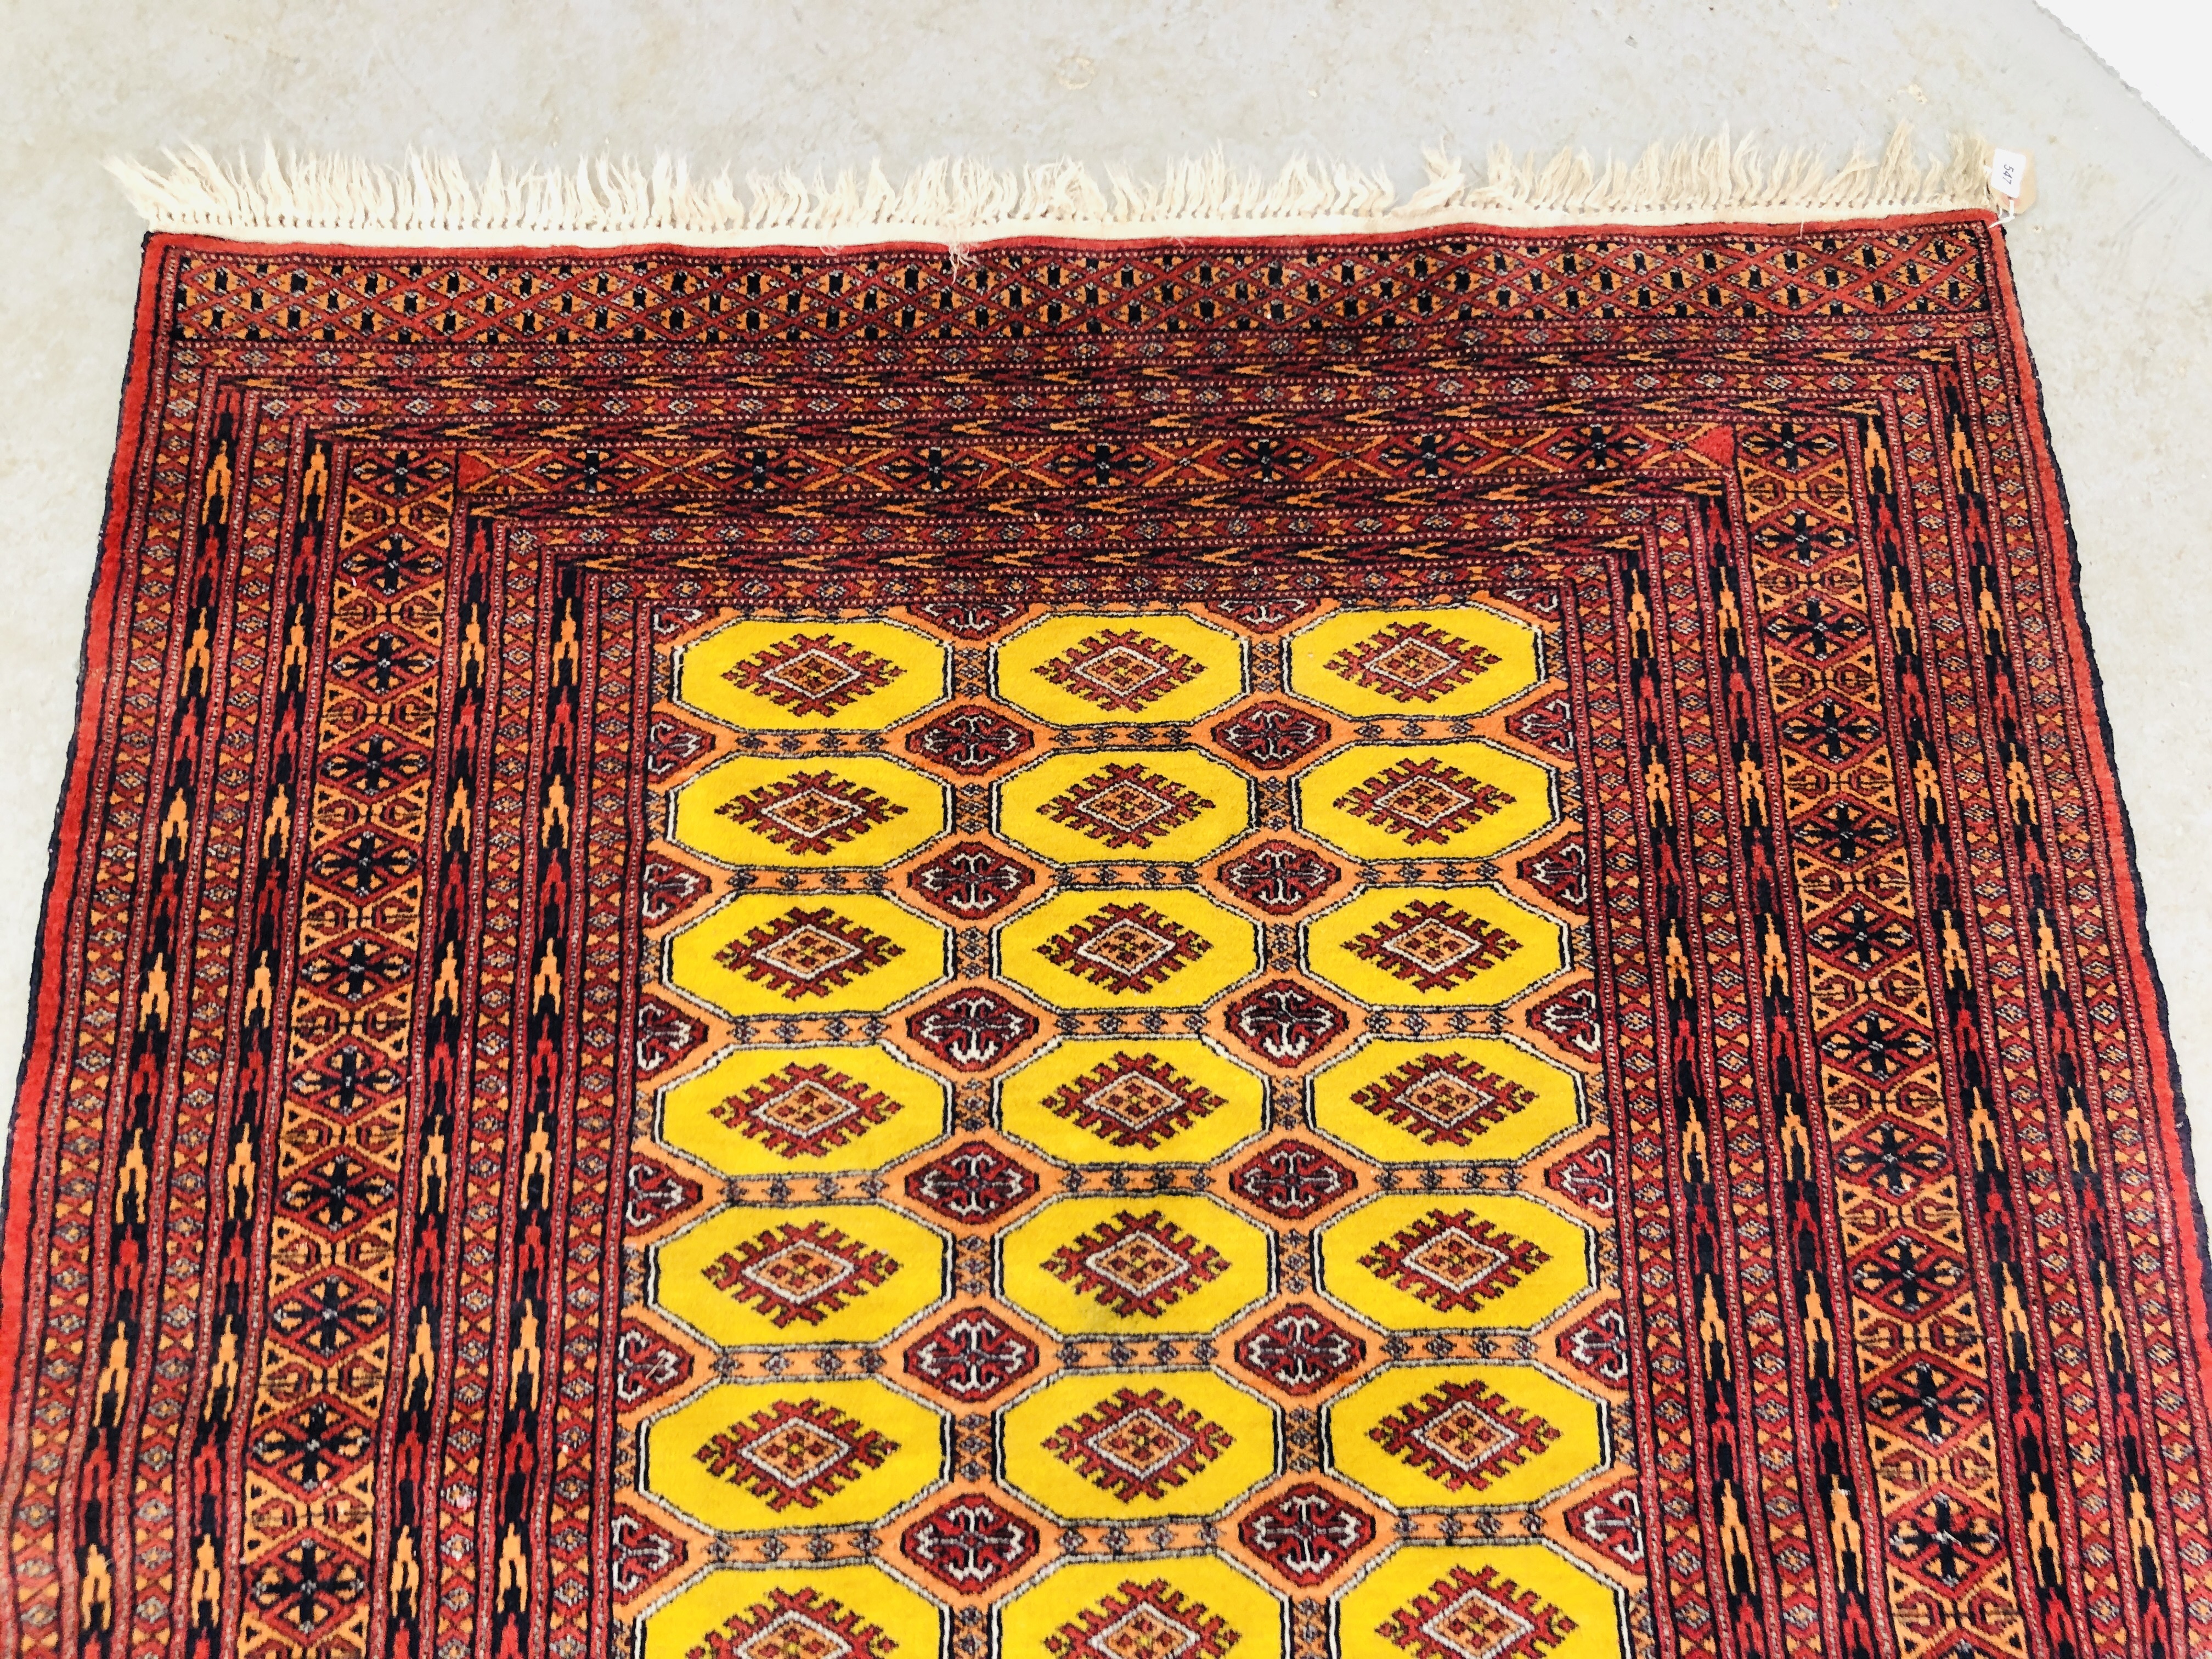 A MODERN TURKOMAN STYLE RUG WITH CENTRAL YELLOW FIELD, 72 INCH X 50 INCH. - Image 5 of 6